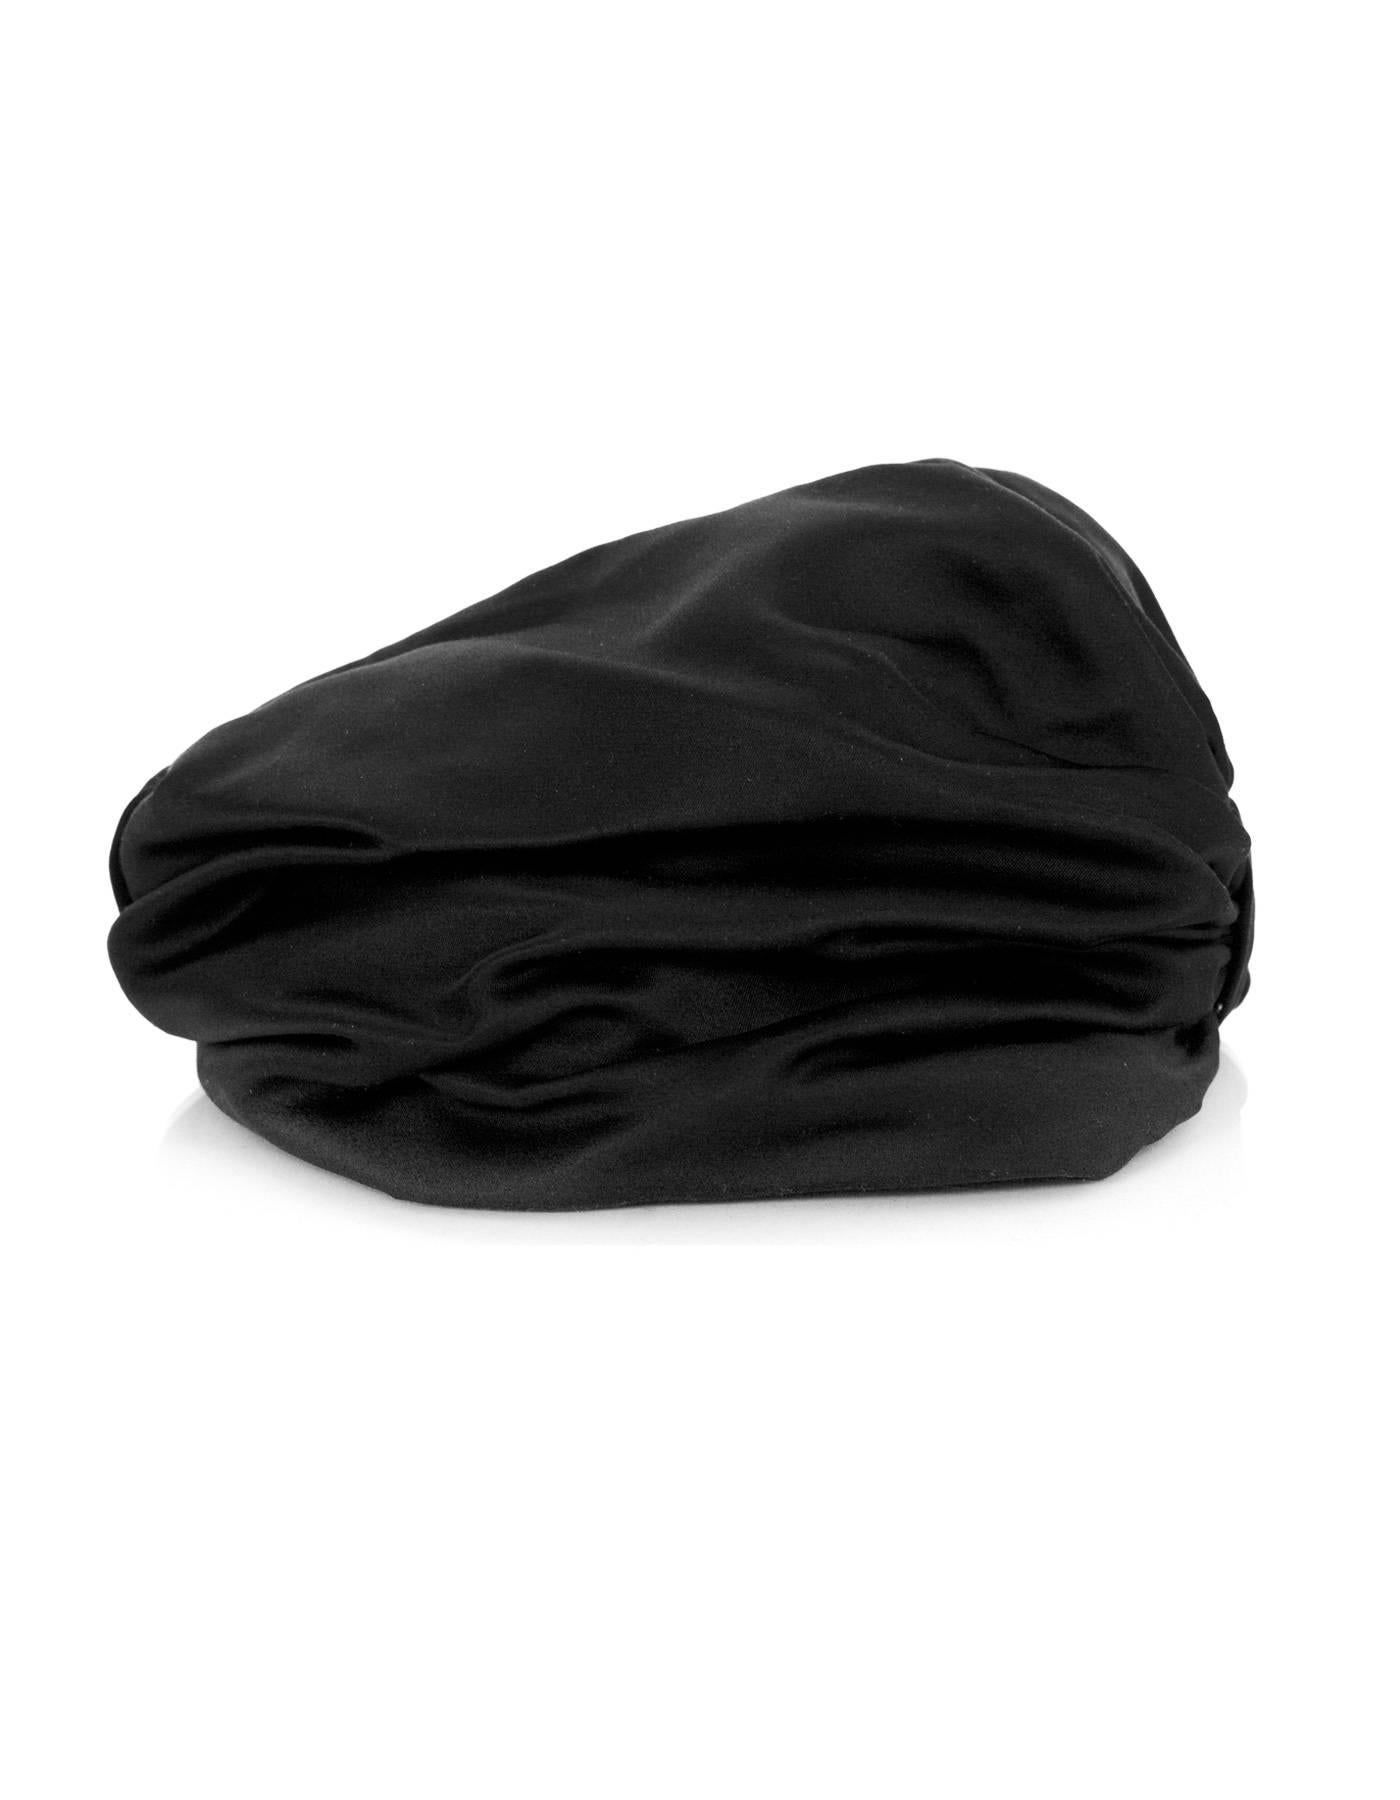 Jennifer Behr Black Satin Turban 
Color: Black
Materials: Satin-silk blend
Retail Price: $495 + tax

Overall Condition: Excellent pre-owned condition.  Light moth ball odor
Hat Size: Large (EU 58/US 7.25)
Diameter: 7.25
Circumference: 22.75"